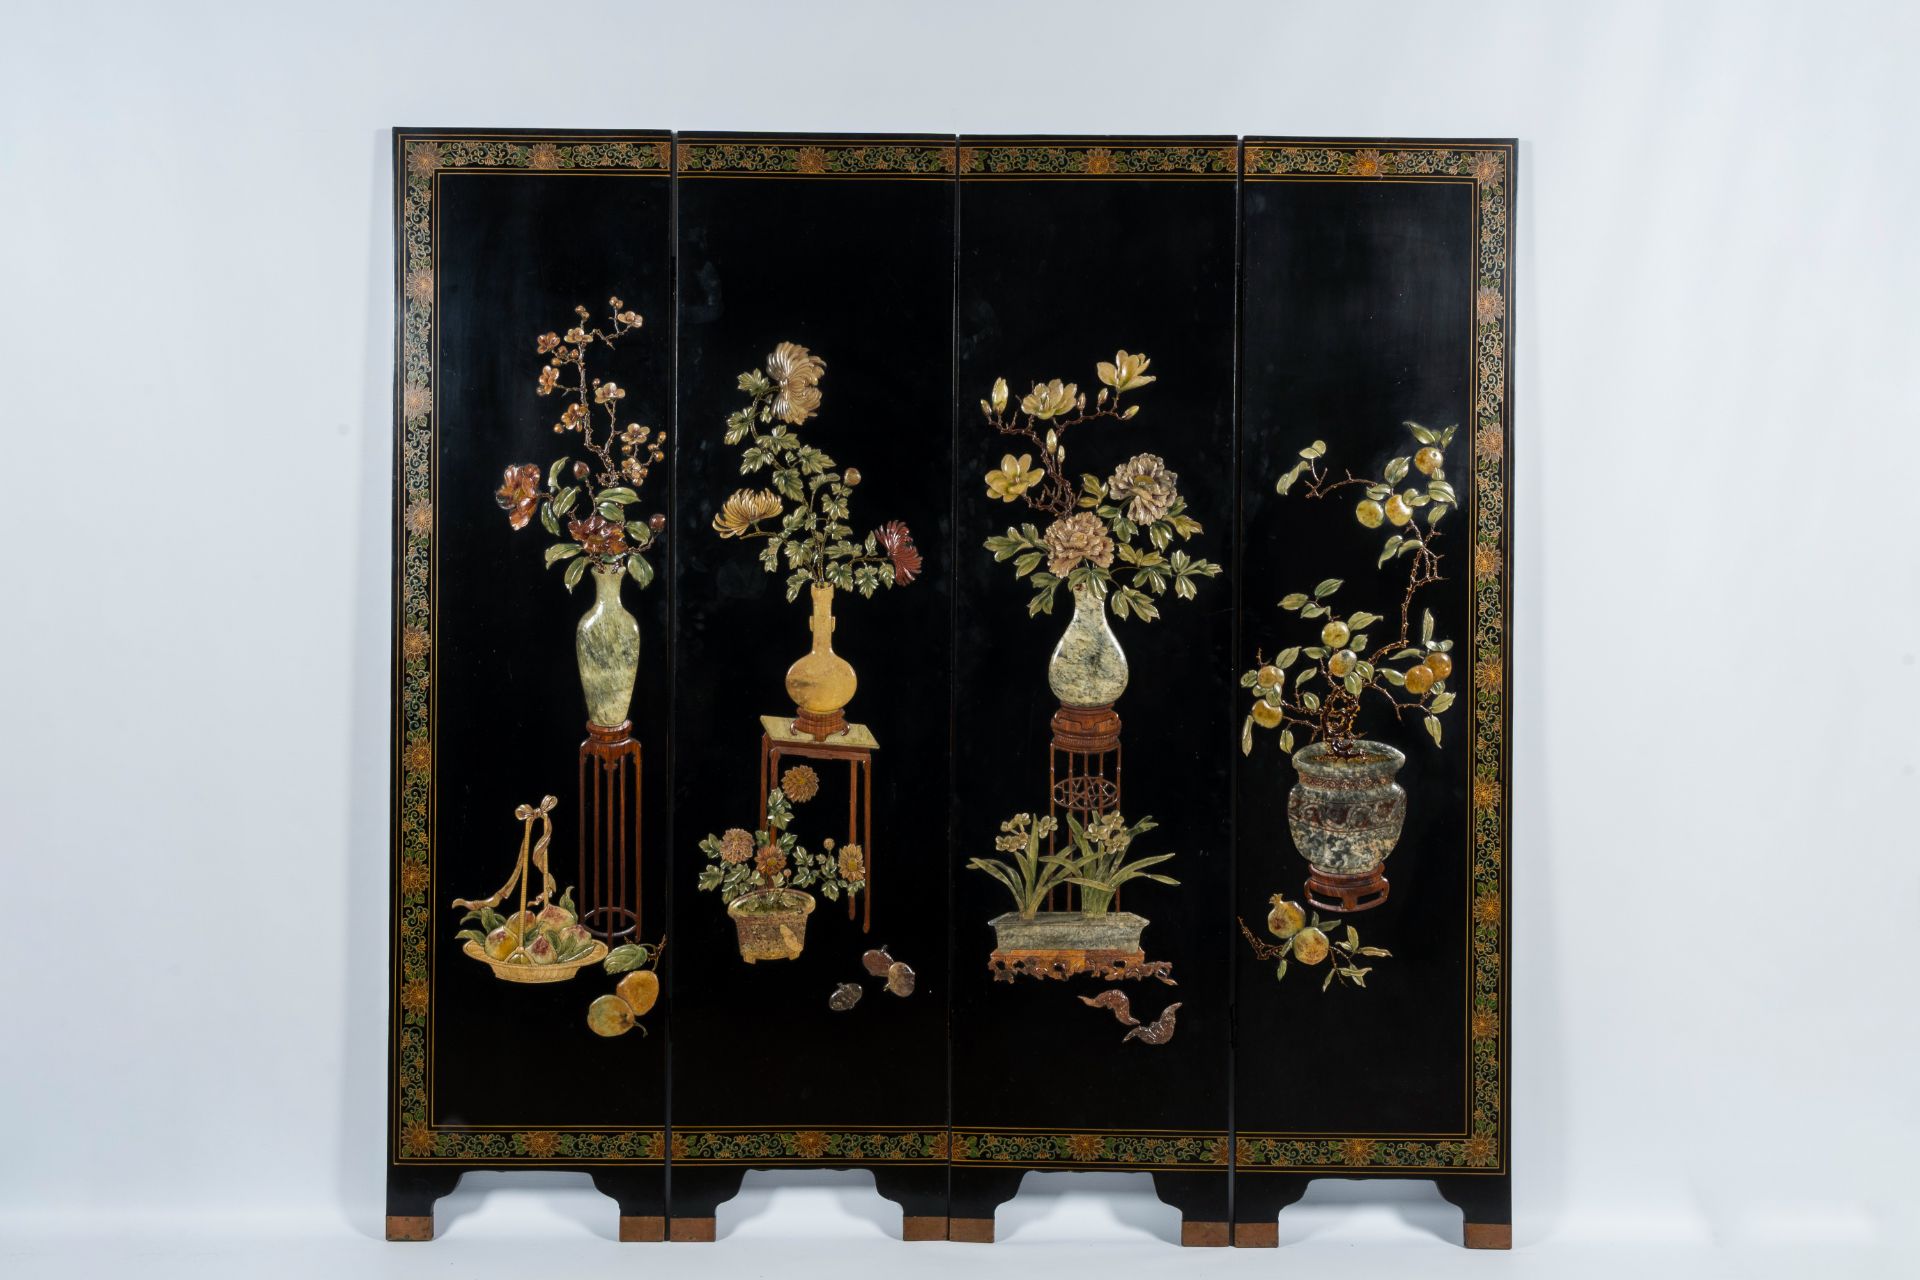 A Chinese four-panel room divider in precious stone-embellished lacquered wood, 20th C. - Image 3 of 9